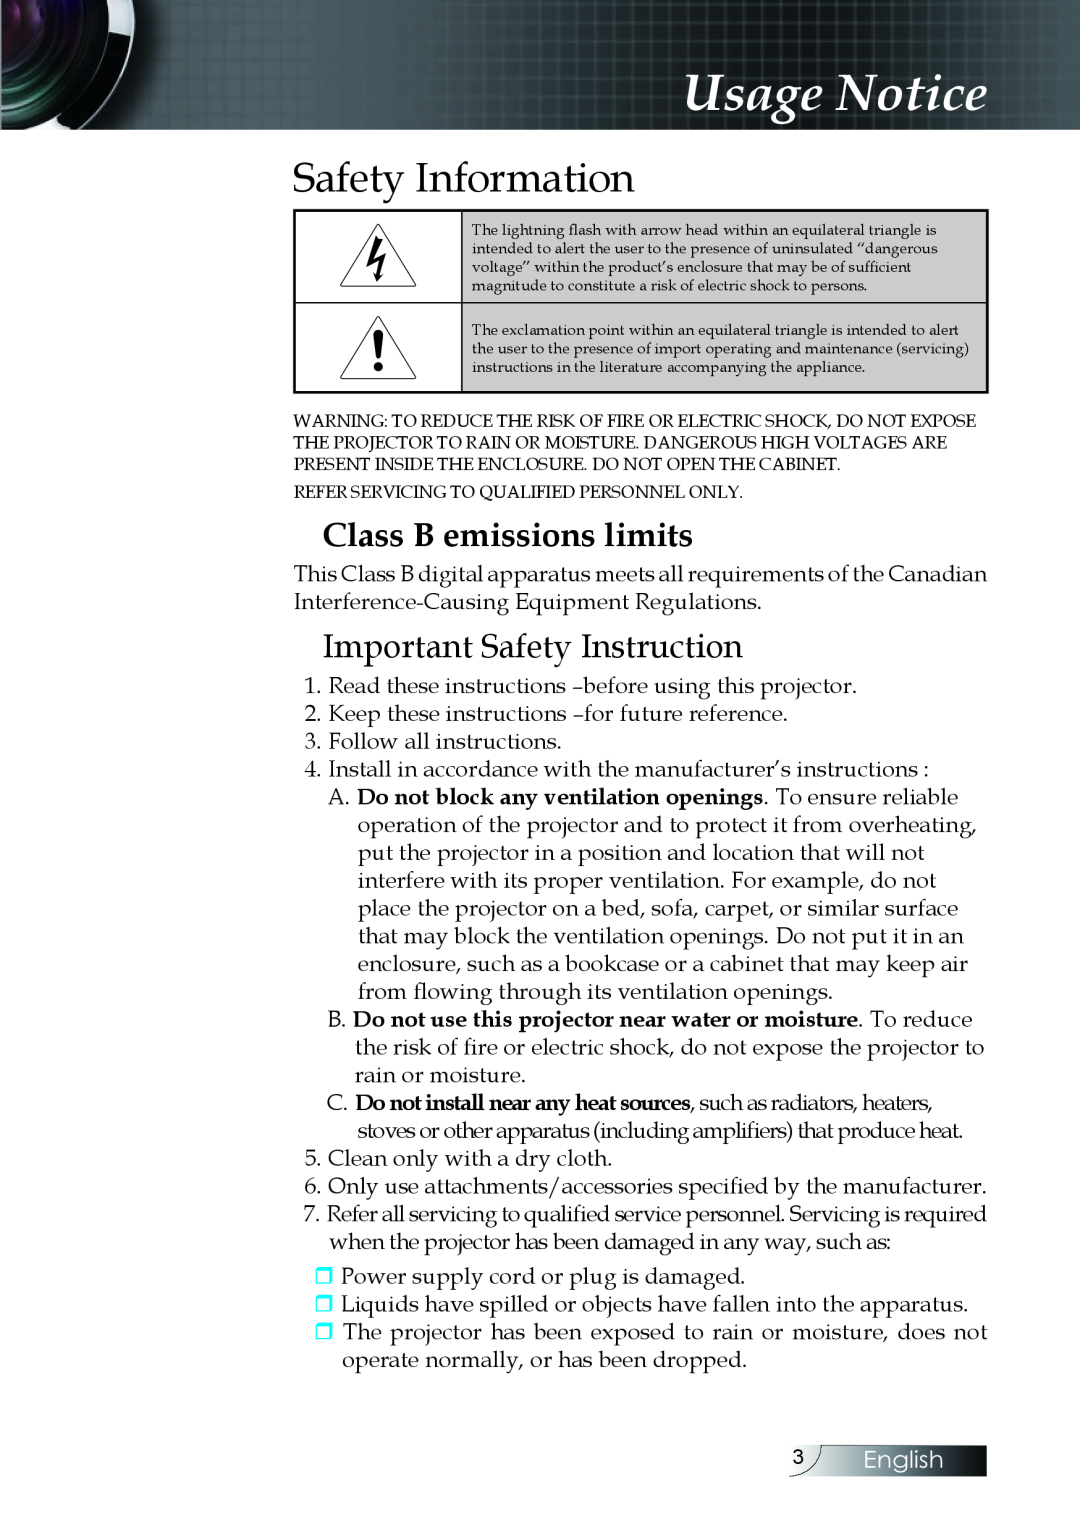 Optoma Technology EH505 Usage Notice, Safety Information, Class B emissions limits, Important Safety Instruction, English 